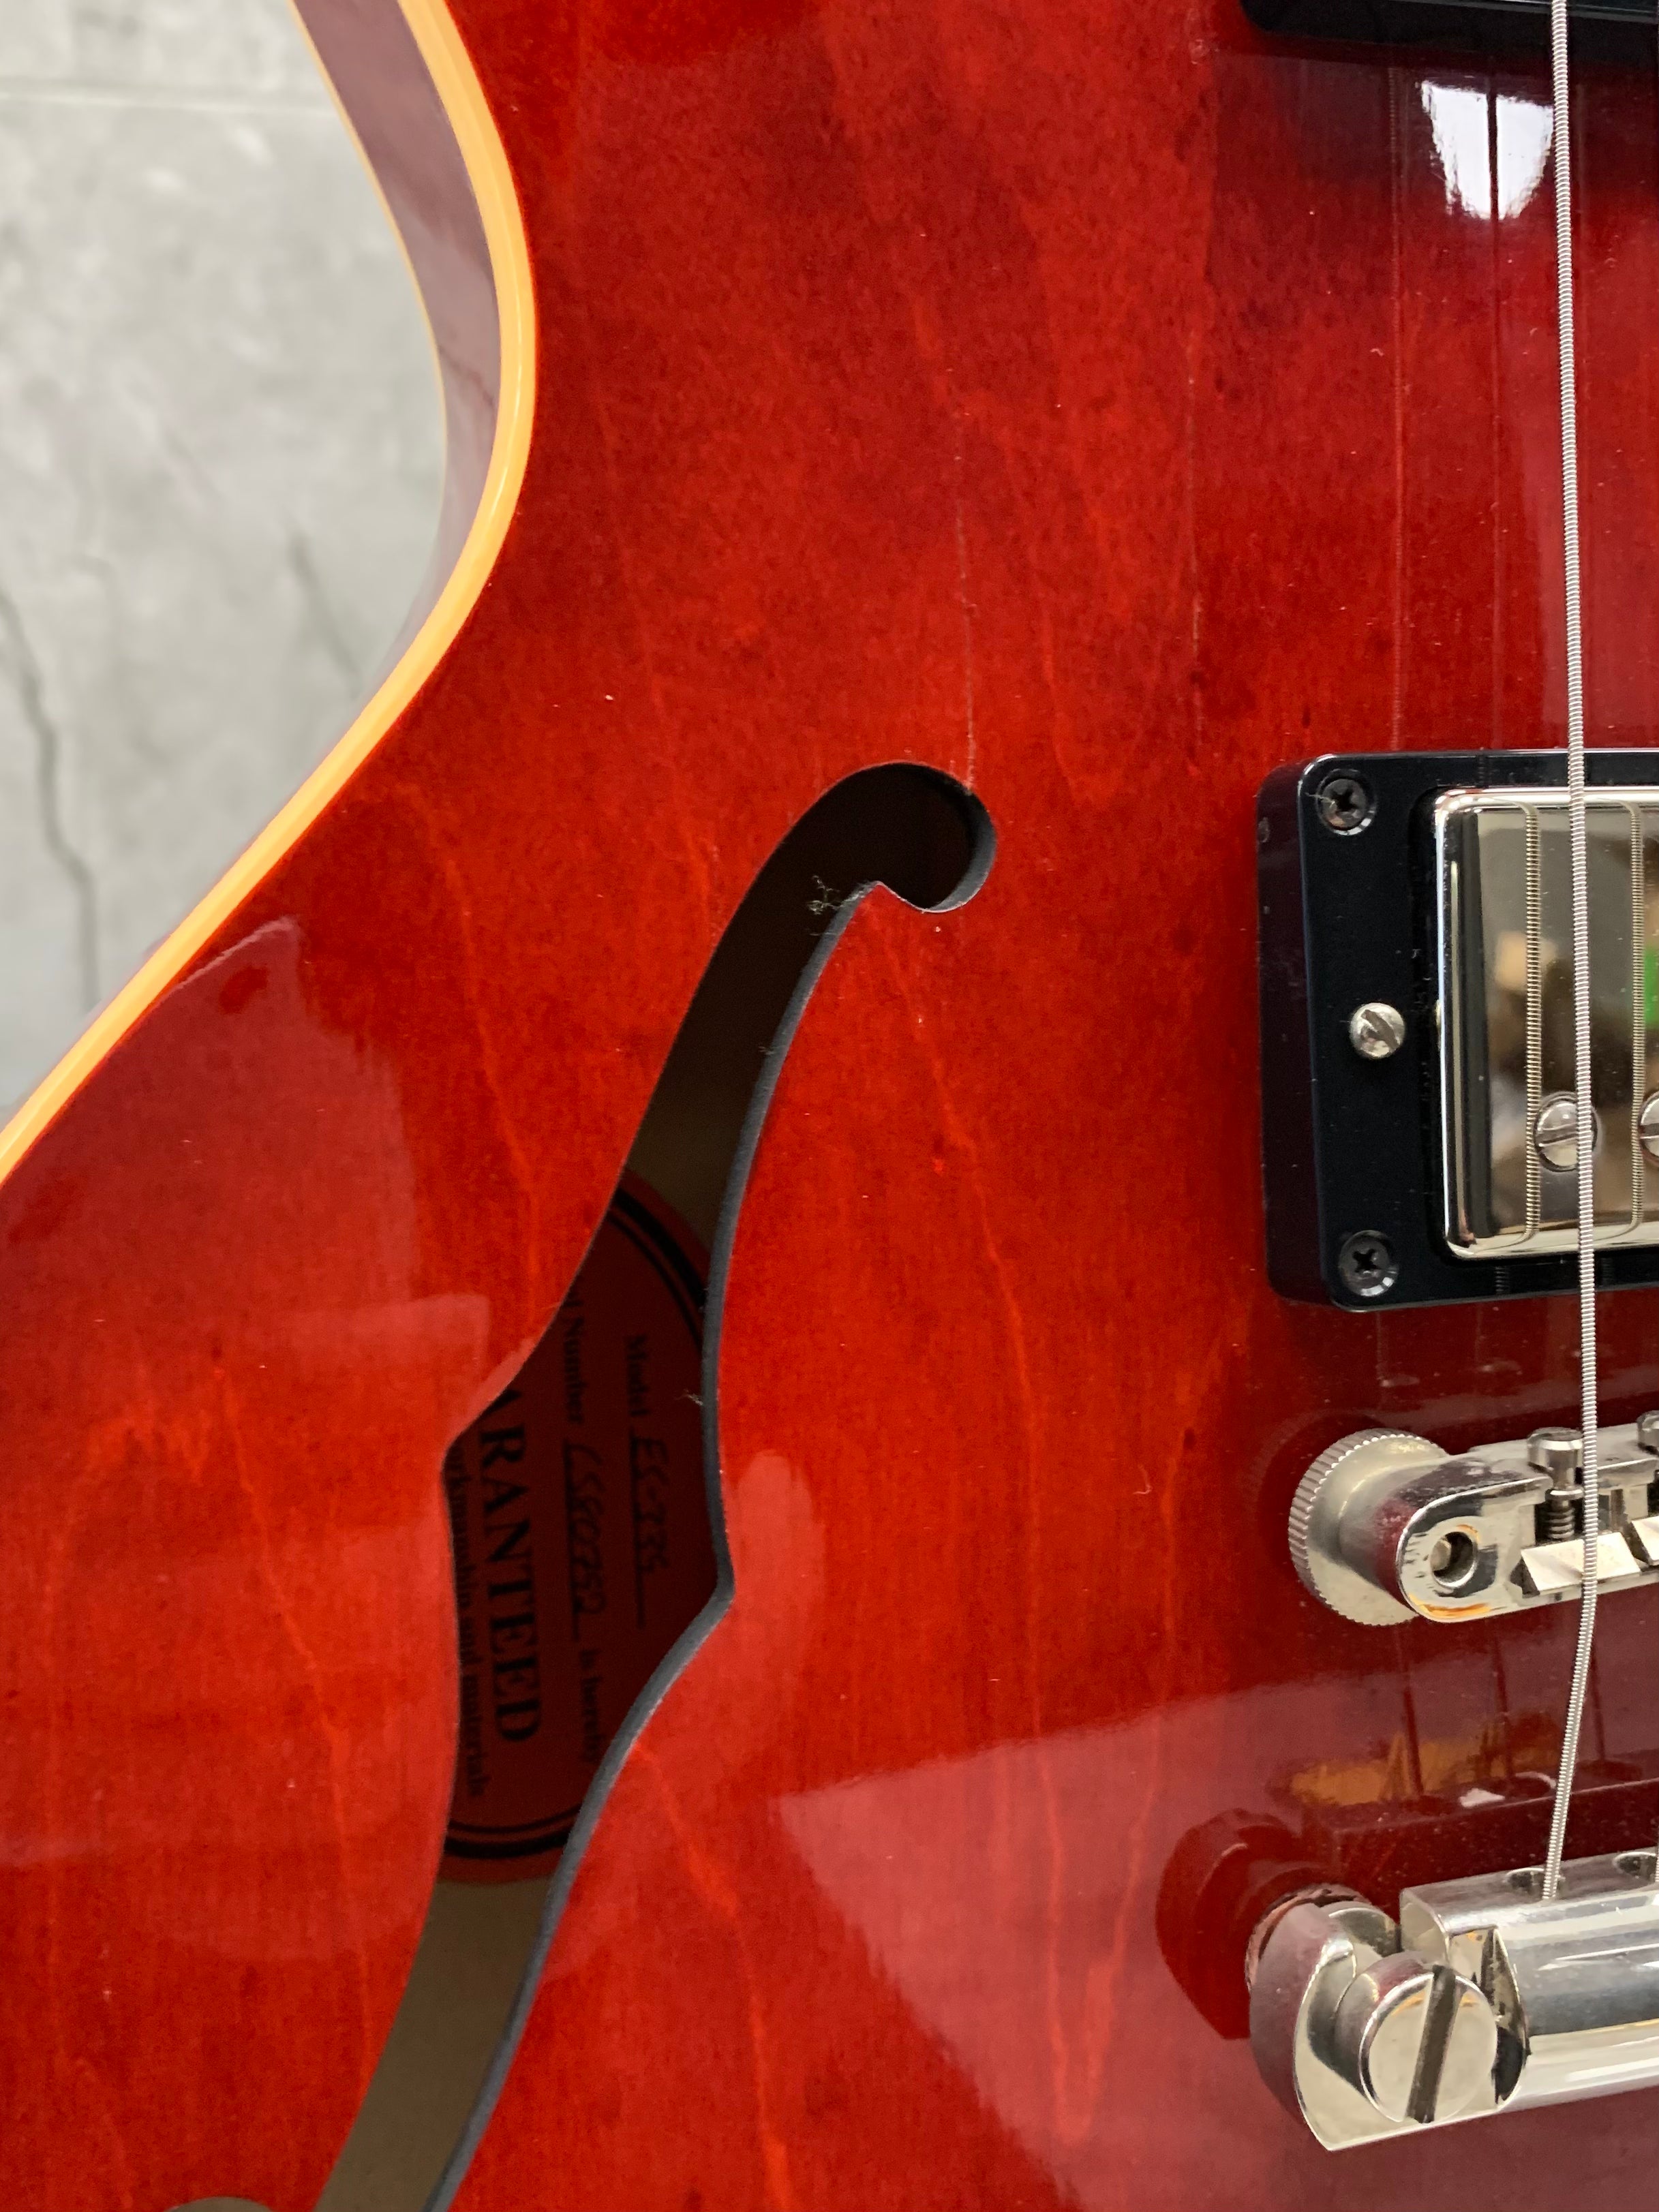 GIBSON ES 339 CHERRY GLOSS FINISH - USED 2008 - SEE PICTURES FOR DETAILS SERIAL NUMBER CS80792 - 8.0 LBS